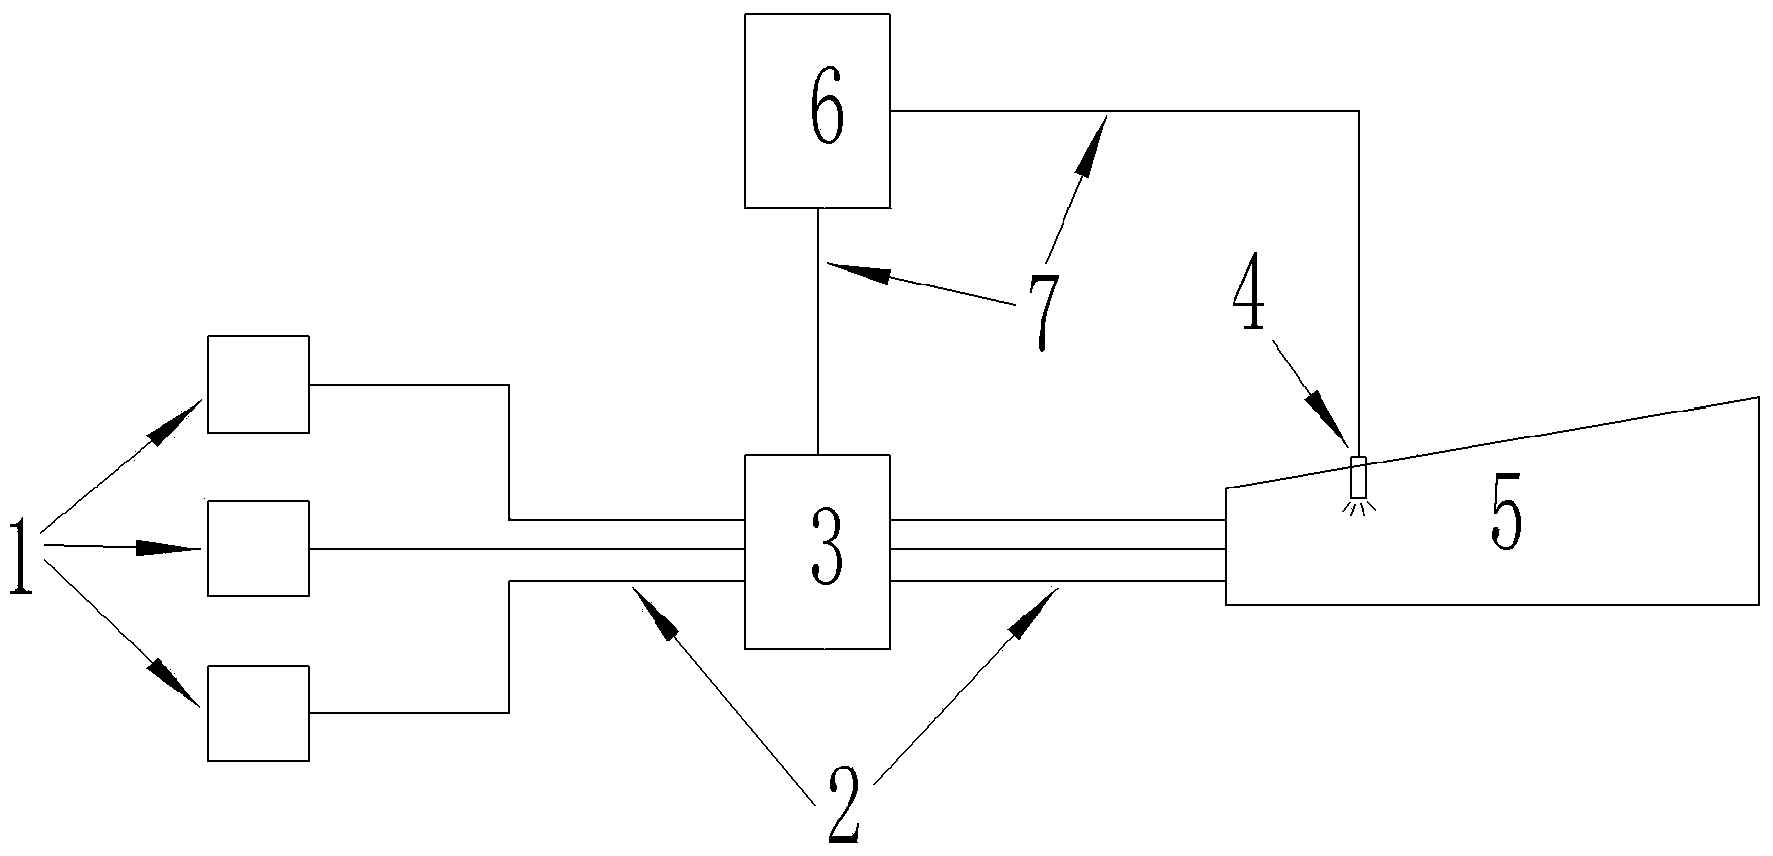 Electric equipment control circuit applied to supersonic combustion test